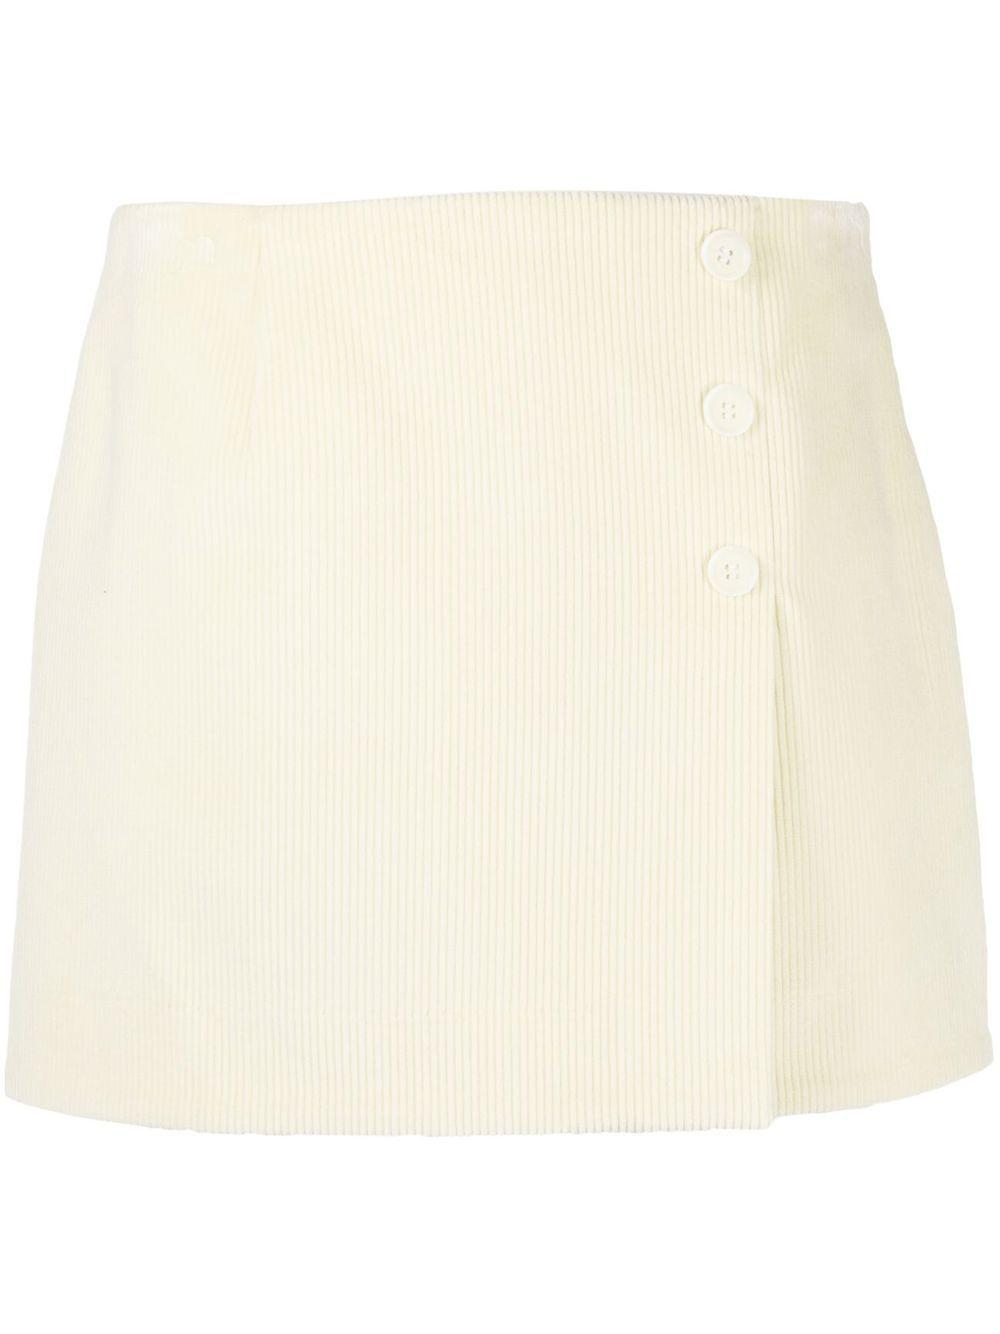 Womens Skirts P.A.R.O.S.H Skirts Cream in Natural Skirts P.A.R.O.S.H 